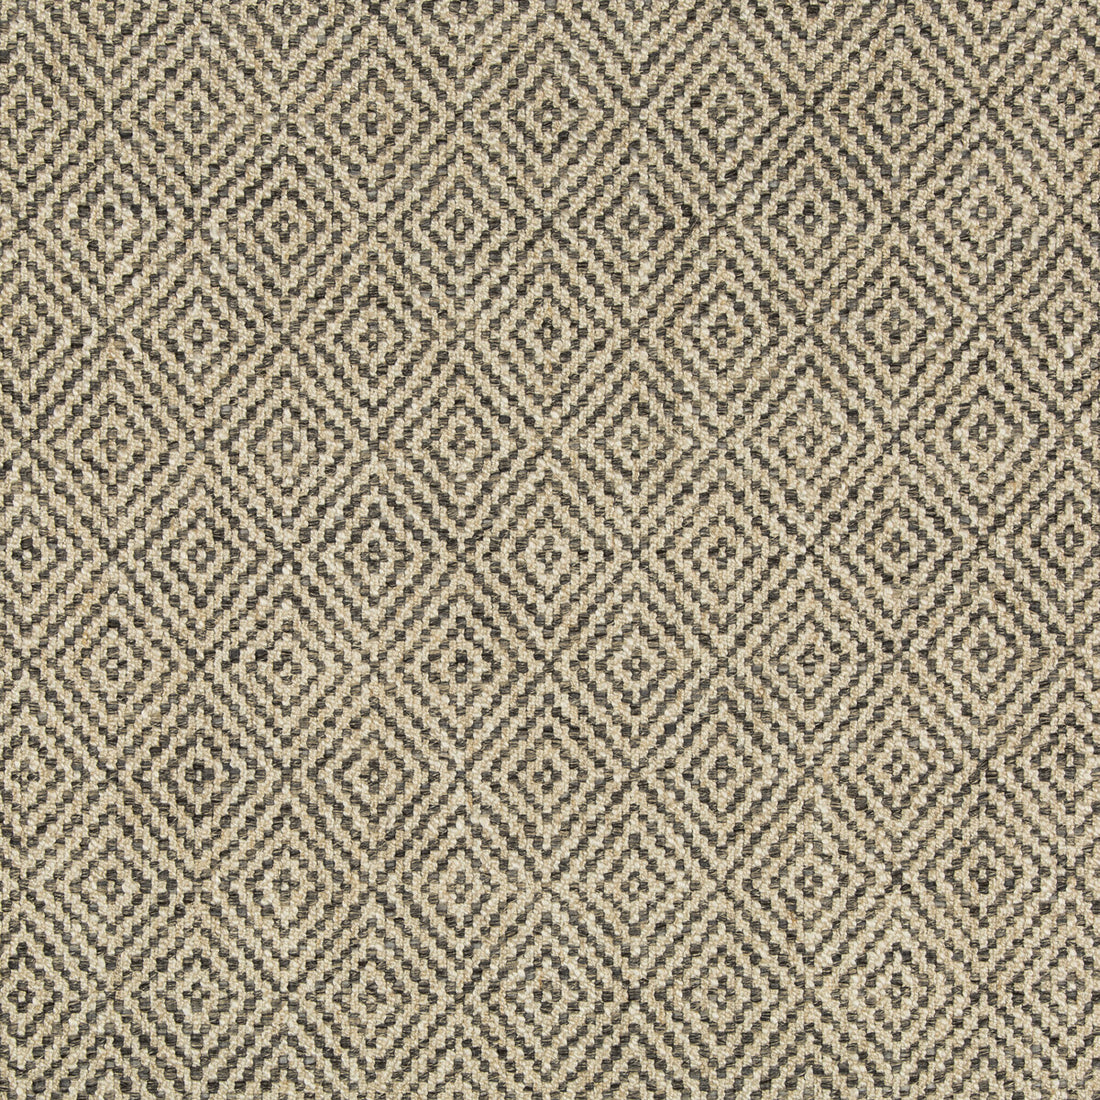 Izu fabric in slate color - pattern 35446.1611.0 - by Kravet Couture in the Izu Collection collection